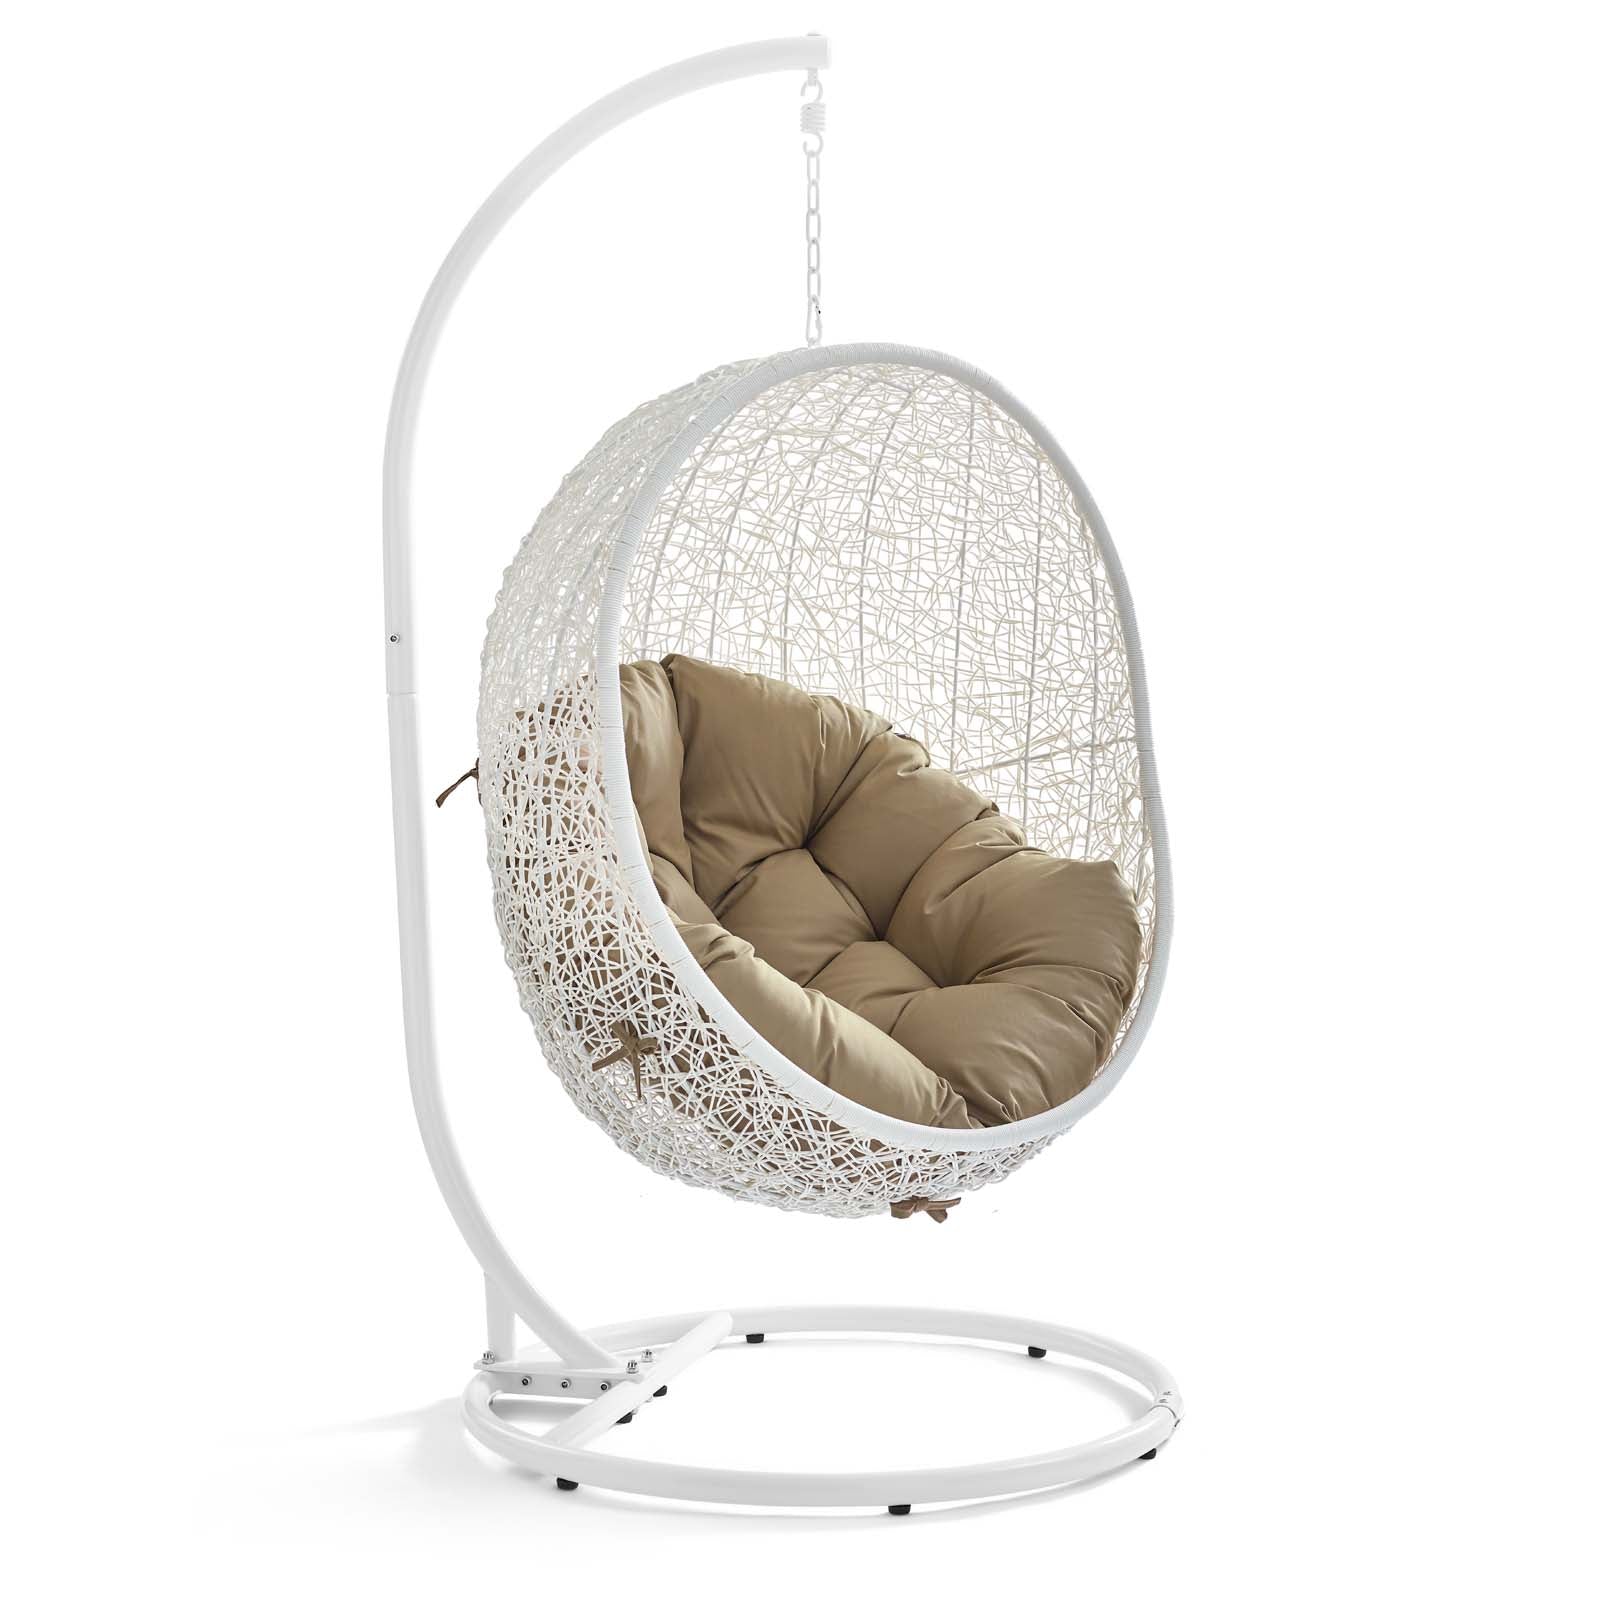 Modway Outdoor Swings - Hide Outdoor Patio Swing Chair With Stand White Mocha